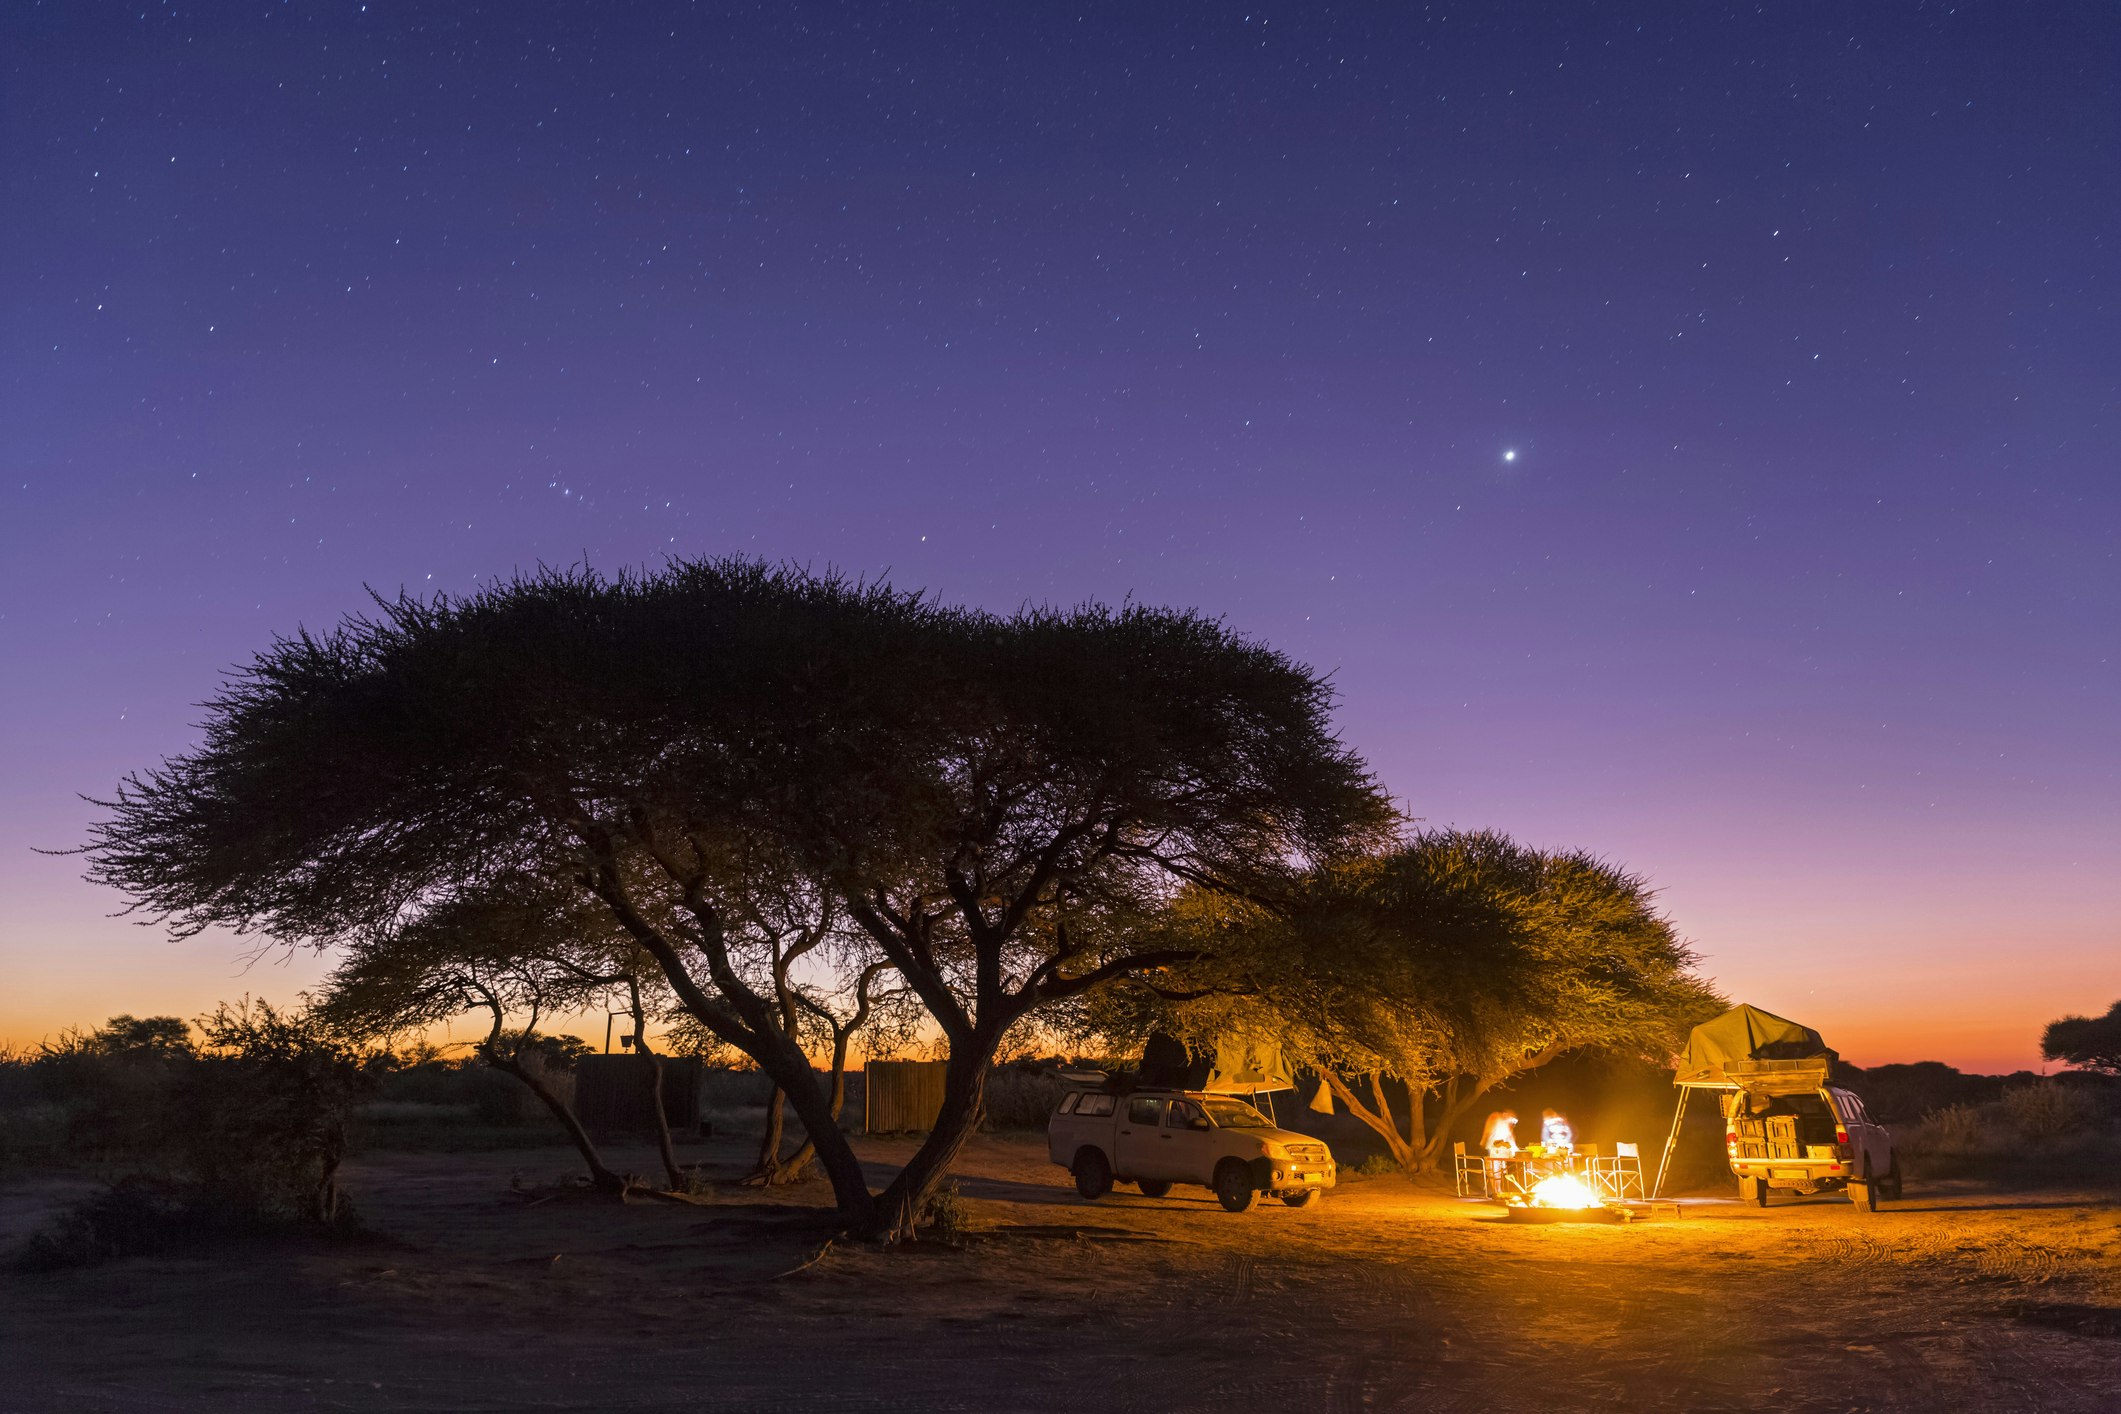 A campsite with safari vans parked under trees with campfire under a starry sky